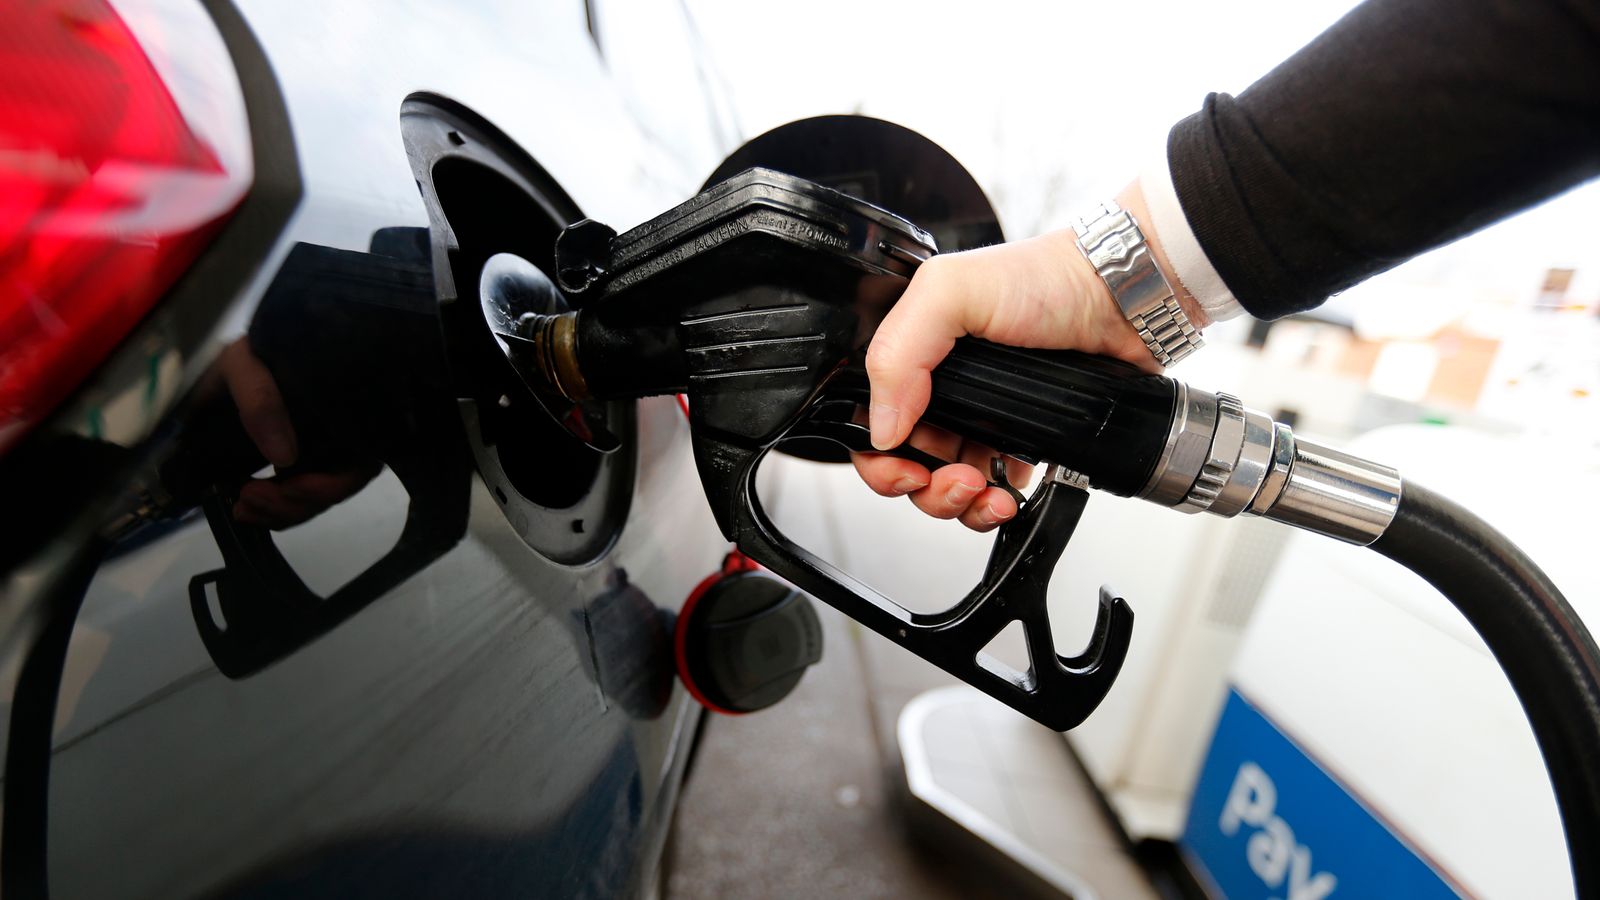 Fuel pump prices 'rising again' as oil hits two-month high